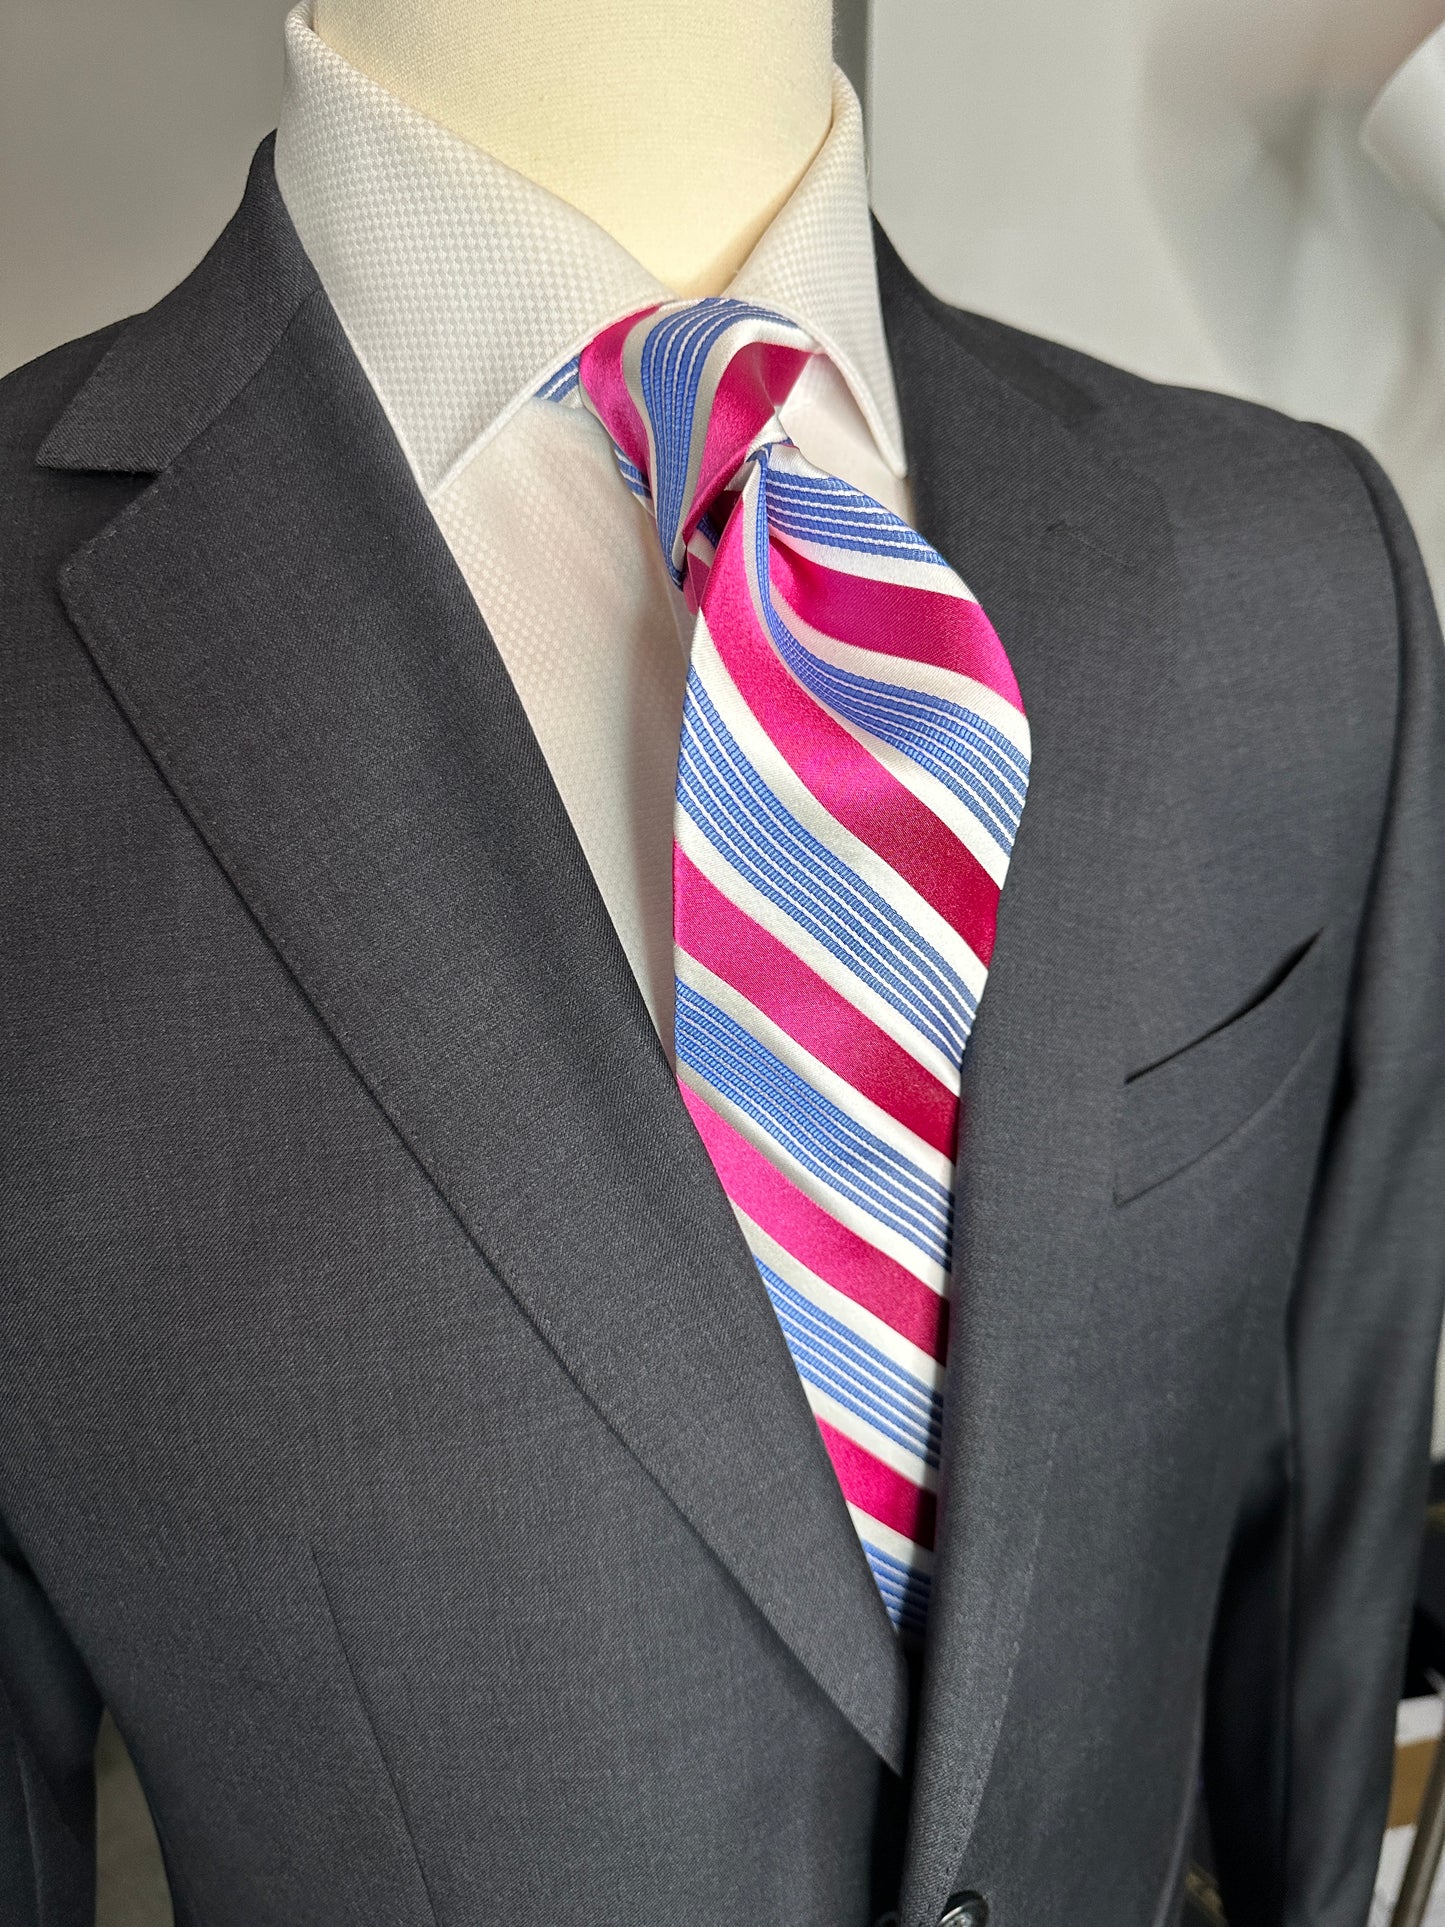 SUITCAFE Silk Tie Raspberry & White Stripe with Blue Narrow Bands